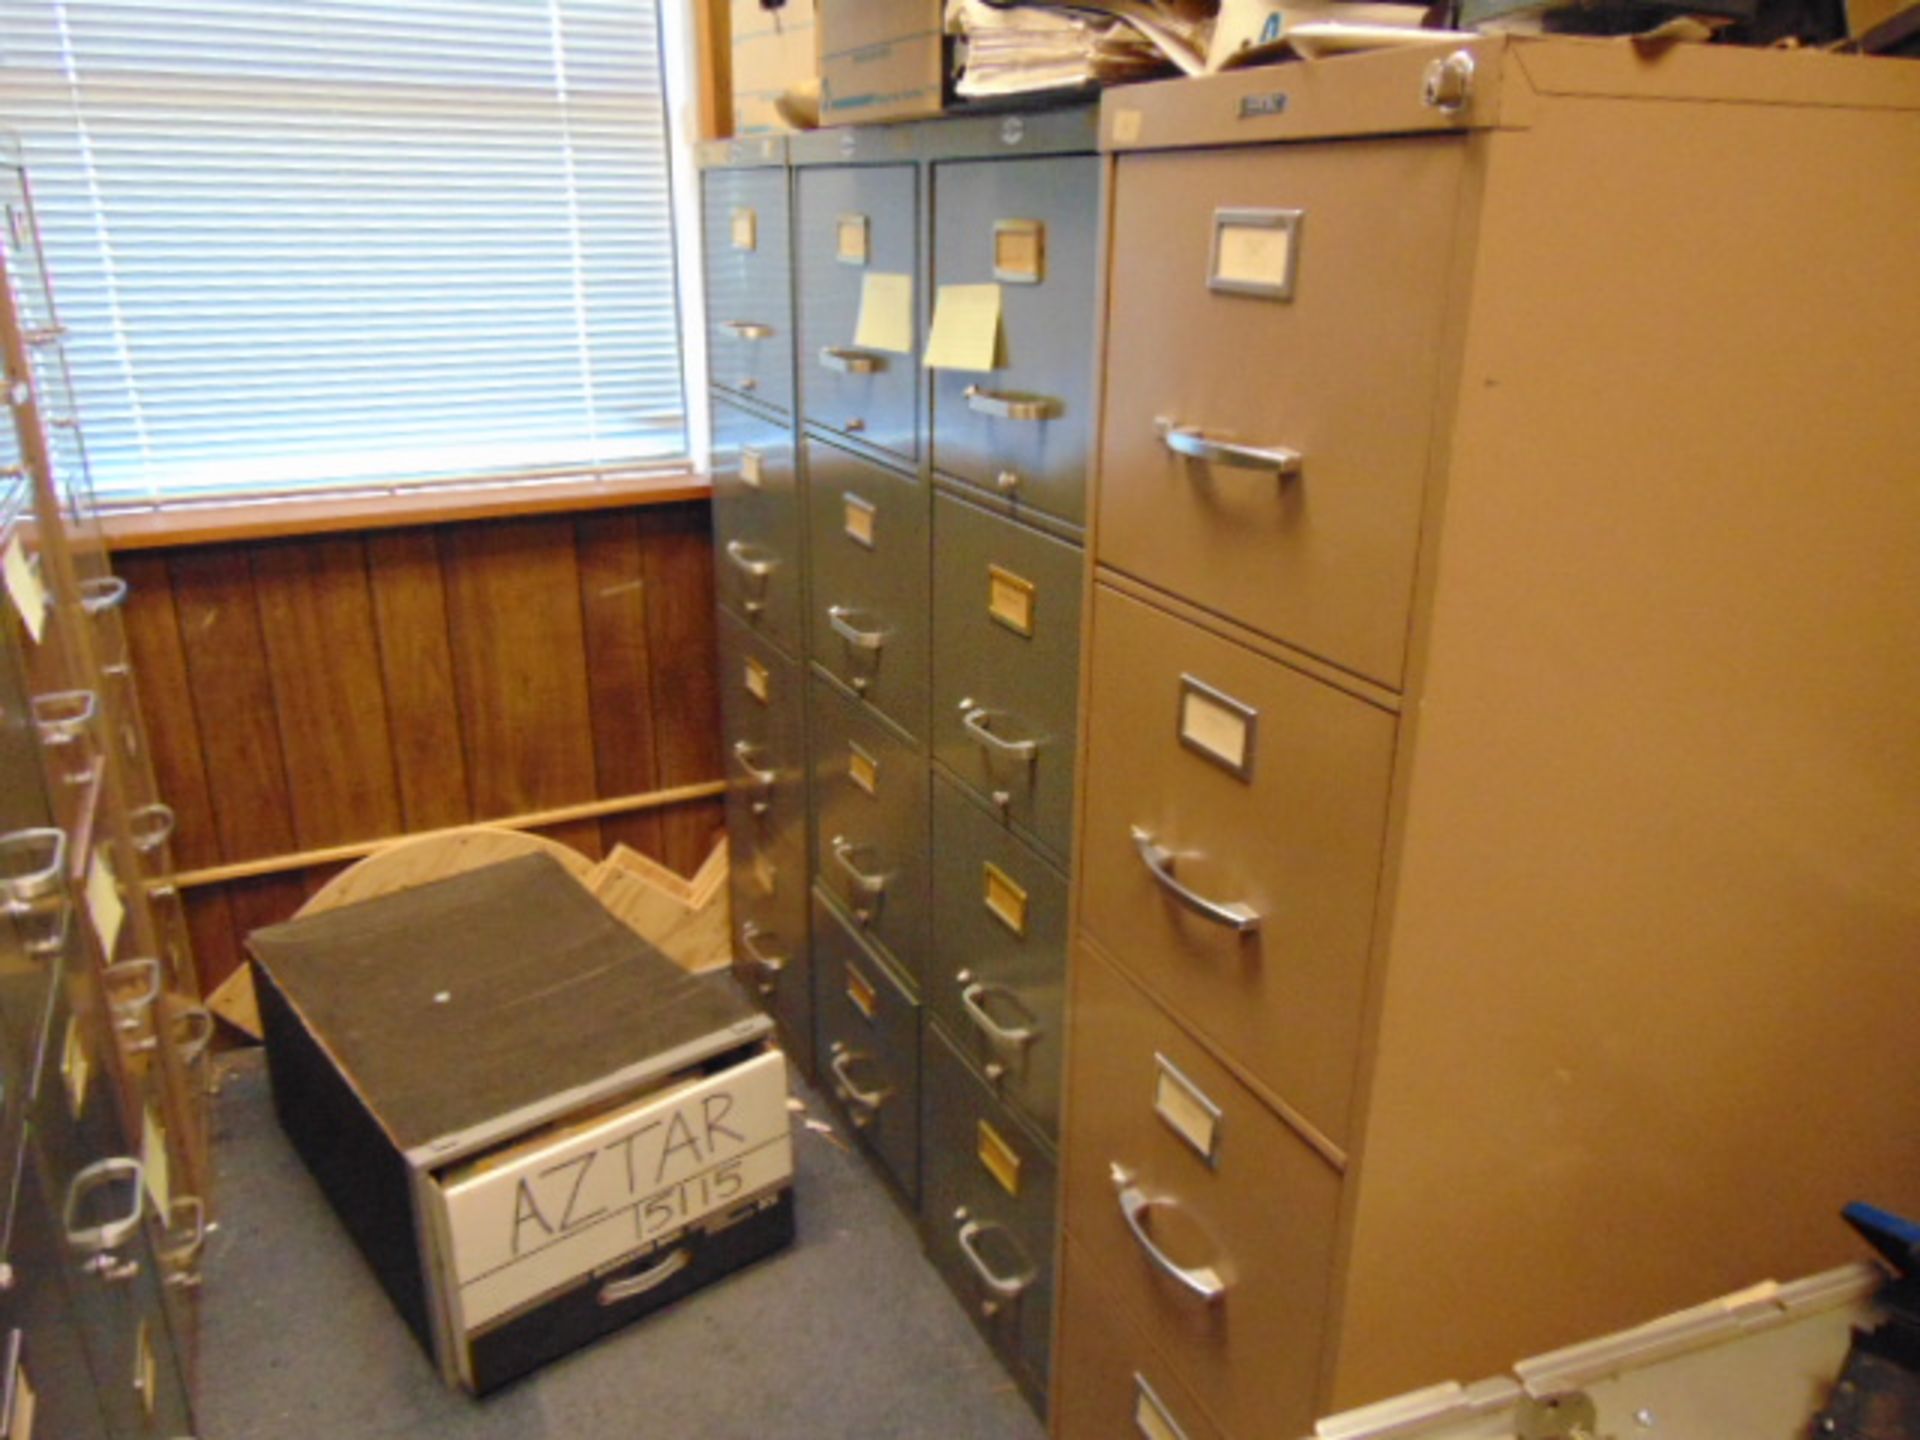 LOT CONSISTING OF: desk, credenza, file cabinets (in two rooms located upstairs)